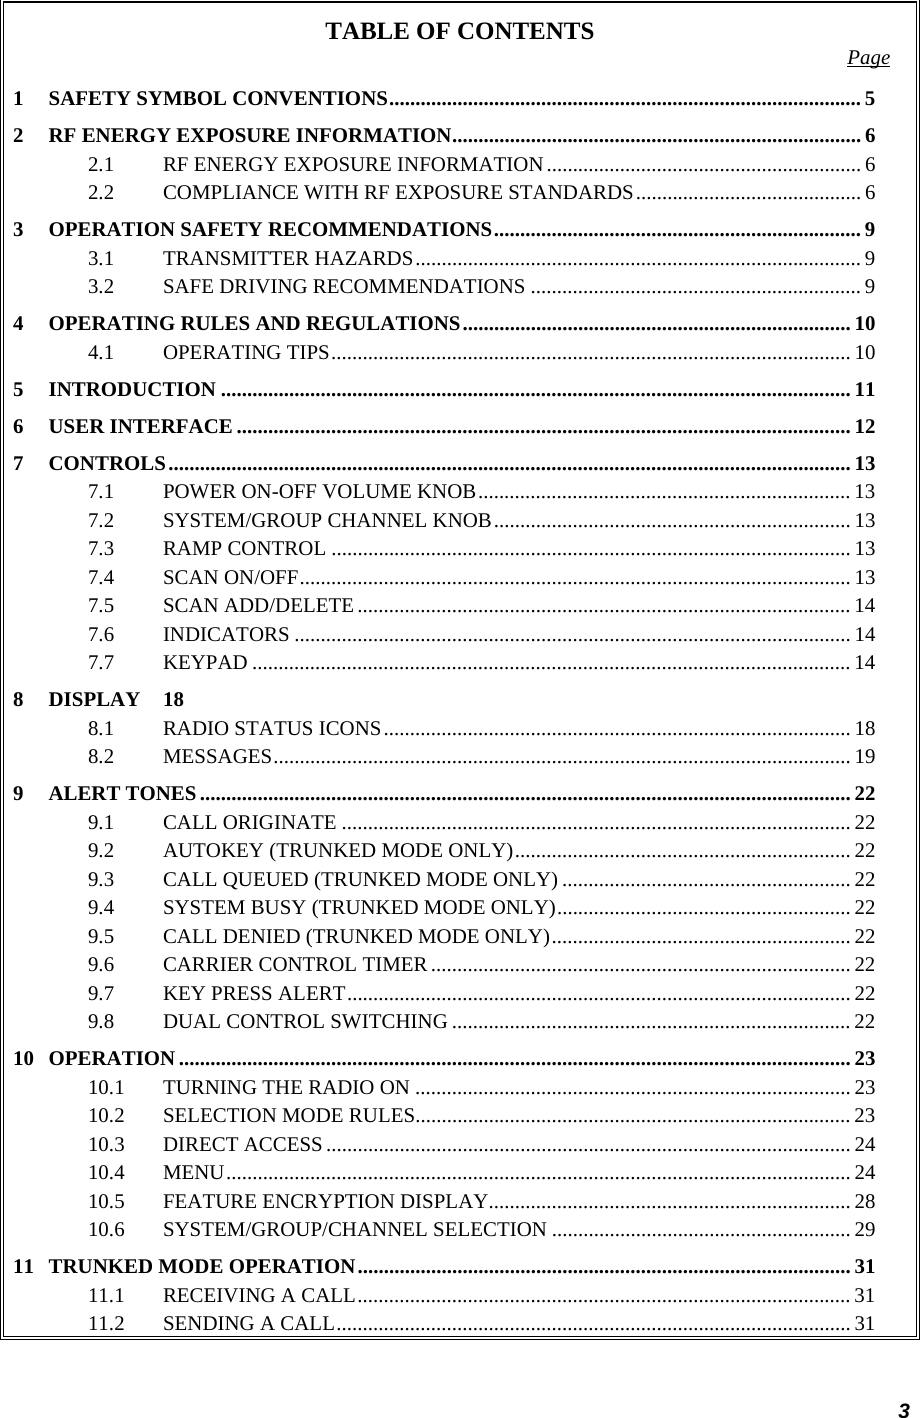 3 TABLE OF CONTENTS  Page 1 SAFETY SYMBOL CONVENTIONS.......................................................................................... 5 2 RF ENERGY EXPOSURE INFORMATION.............................................................................. 6 2.1 RF ENERGY EXPOSURE INFORMATION............................................................ 6 2.2 COMPLIANCE WITH RF EXPOSURE STANDARDS........................................... 6 3 OPERATION SAFETY RECOMMENDATIONS...................................................................... 9 3.1 TRANSMITTER HAZARDS..................................................................................... 9 3.2 SAFE DRIVING RECOMMENDATIONS ............................................................... 9 4 OPERATING RULES AND REGULATIONS.......................................................................... 10 4.1 OPERATING TIPS................................................................................................... 10 5 INTRODUCTION ........................................................................................................................ 11 6 USER INTERFACE ..................................................................................................................... 12 7 CONTROLS.................................................................................................................................. 13 7.1 POWER ON-OFF VOLUME KNOB....................................................................... 13 7.2 SYSTEM/GROUP CHANNEL KNOB.................................................................... 13 7.3 RAMP CONTROL ................................................................................................... 13 7.4 SCAN ON/OFF......................................................................................................... 13 7.5 SCAN ADD/DELETE .............................................................................................. 14 7.6 INDICATORS .......................................................................................................... 14 7.7 KEYPAD .................................................................................................................. 14 8 DISPLAY 18 8.1 RADIO STATUS ICONS......................................................................................... 18 8.2 MESSAGES.............................................................................................................. 19 9 ALERT TONES............................................................................................................................ 22 9.1 CALL ORIGINATE ................................................................................................. 22 9.2 AUTOKEY (TRUNKED MODE ONLY)................................................................ 22 9.3 CALL QUEUED (TRUNKED MODE ONLY) ....................................................... 22 9.4 SYSTEM BUSY (TRUNKED MODE ONLY)........................................................ 22 9.5 CALL DENIED (TRUNKED MODE ONLY)......................................................... 22 9.6 CARRIER CONTROL TIMER ................................................................................ 22 9.7 KEY PRESS ALERT................................................................................................ 22 9.8 DUAL CONTROL SWITCHING ............................................................................ 22 10 OPERATION ................................................................................................................................ 23 10.1 TURNING THE RADIO ON ................................................................................... 23 10.2 SELECTION MODE RULES................................................................................... 23 10.3 DIRECT ACCESS .................................................................................................... 24 10.4 MENU....................................................................................................................... 24 10.5 FEATURE ENCRYPTION DISPLAY..................................................................... 28 10.6 SYSTEM/GROUP/CHANNEL SELECTION ......................................................... 29 11 TRUNKED MODE OPERATION.............................................................................................. 31 11.1 RECEIVING A CALL.............................................................................................. 31 11.2 SENDING A CALL.................................................................................................. 31 